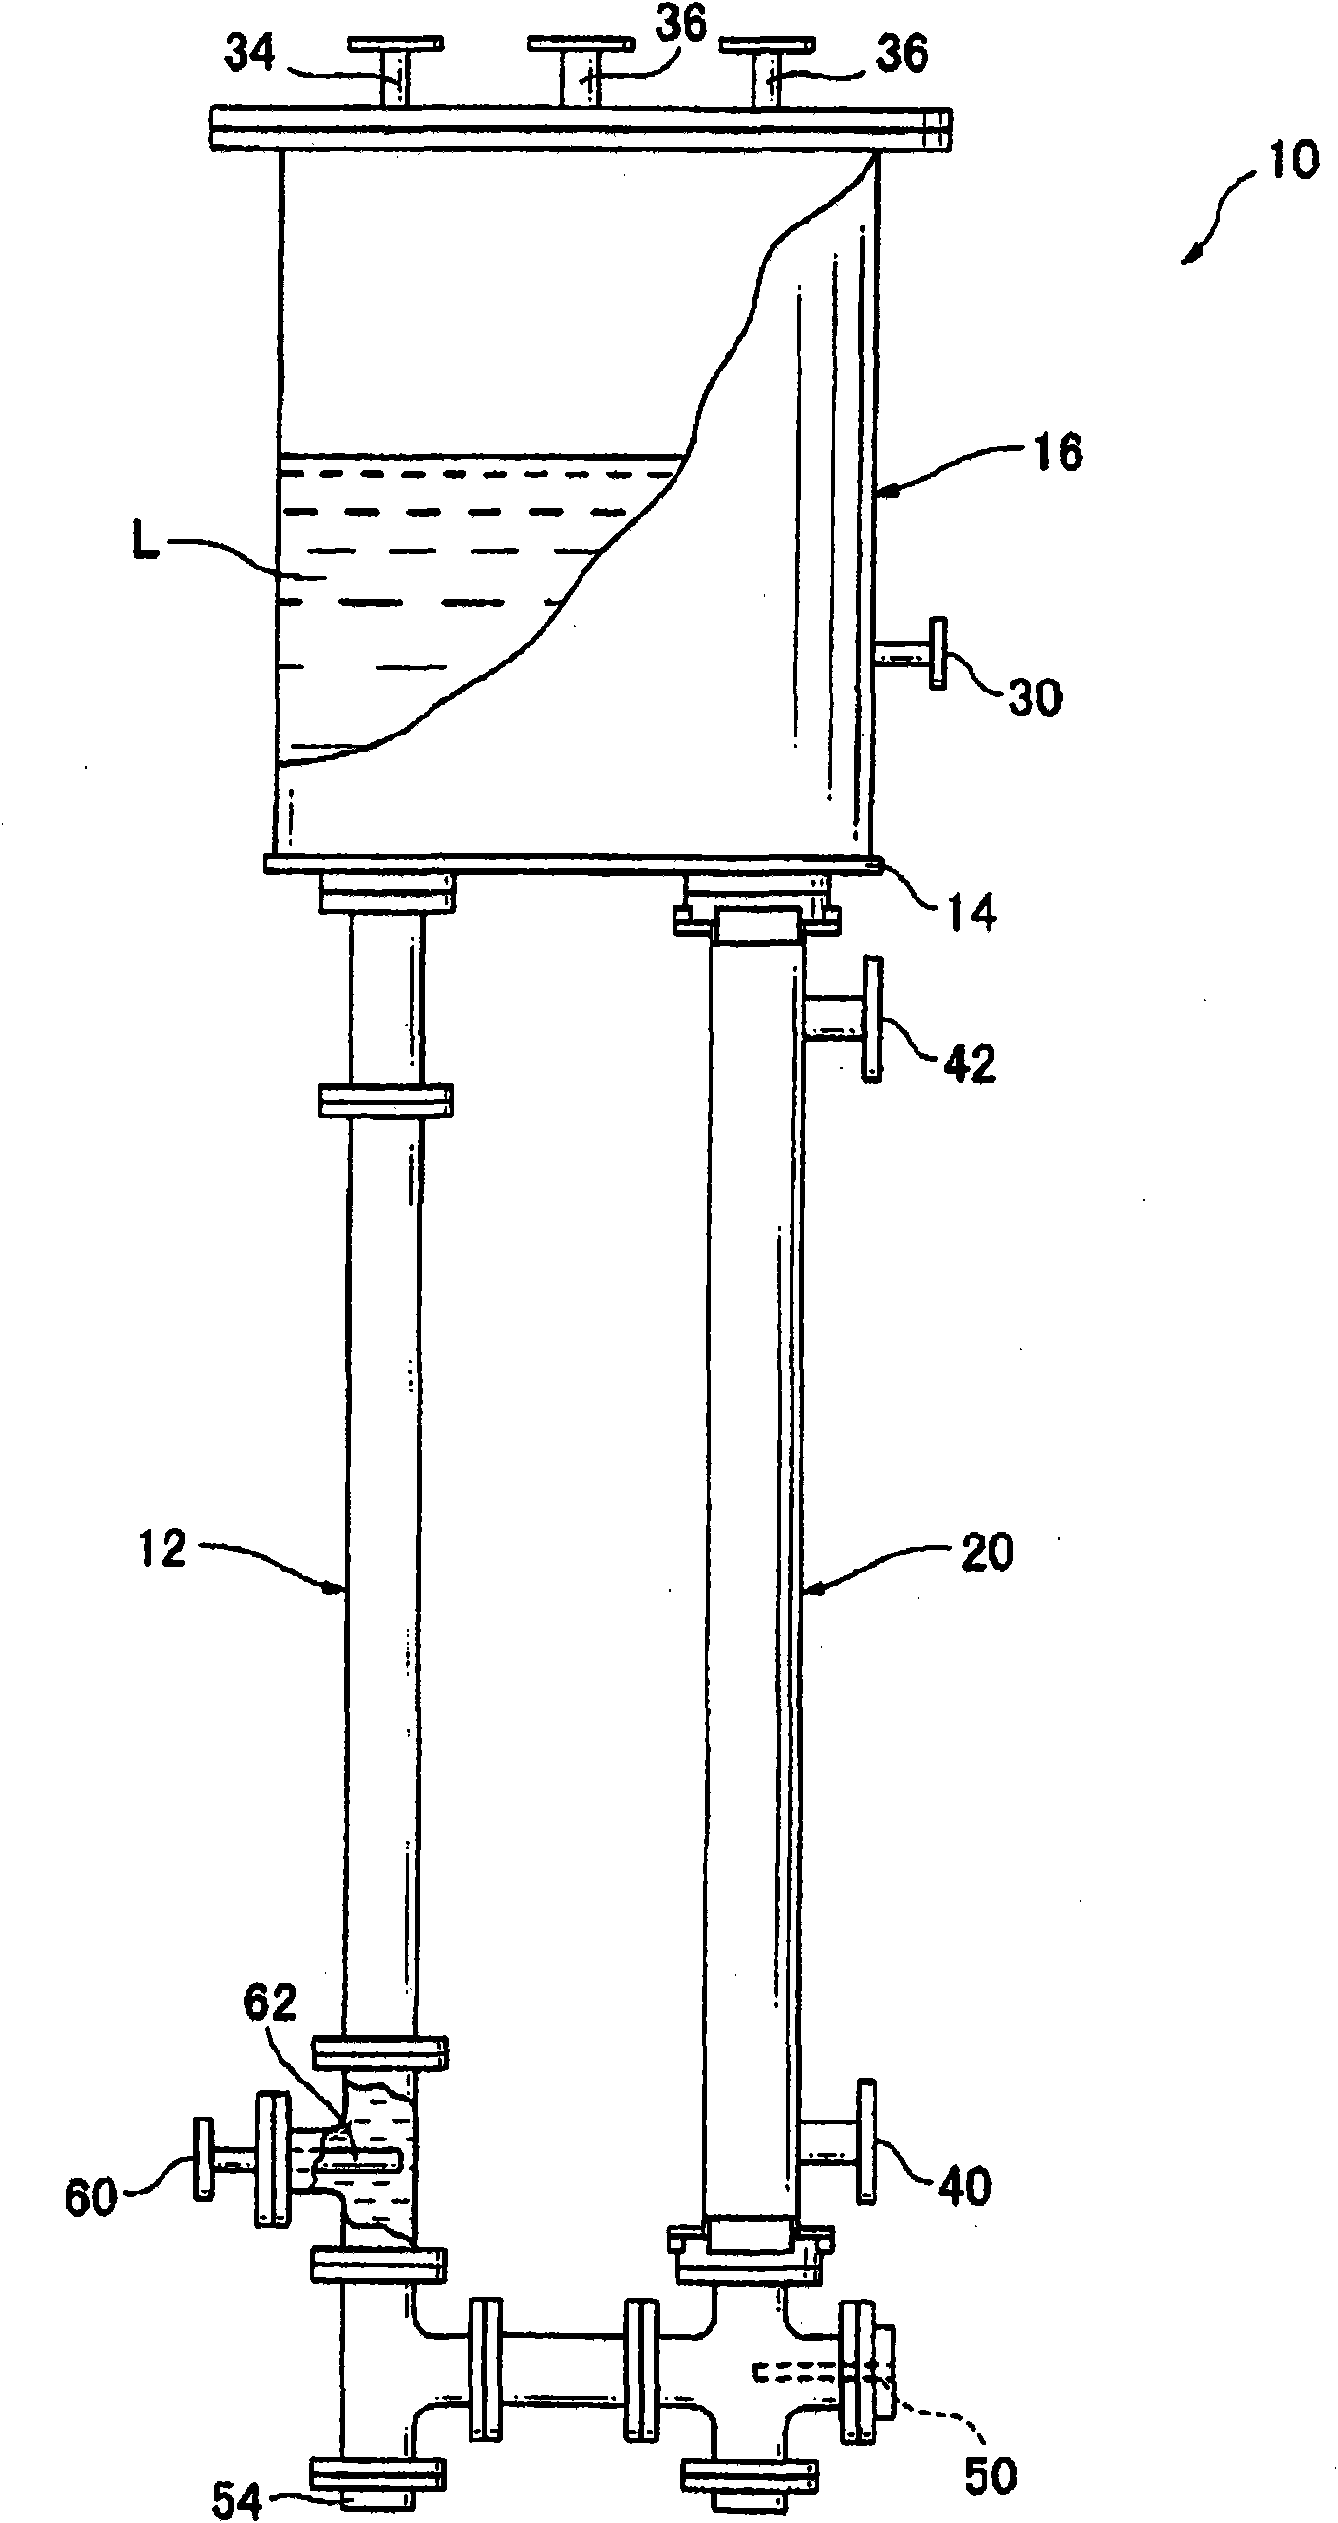 Process and apparatus for producing fluorinated gaseous compound